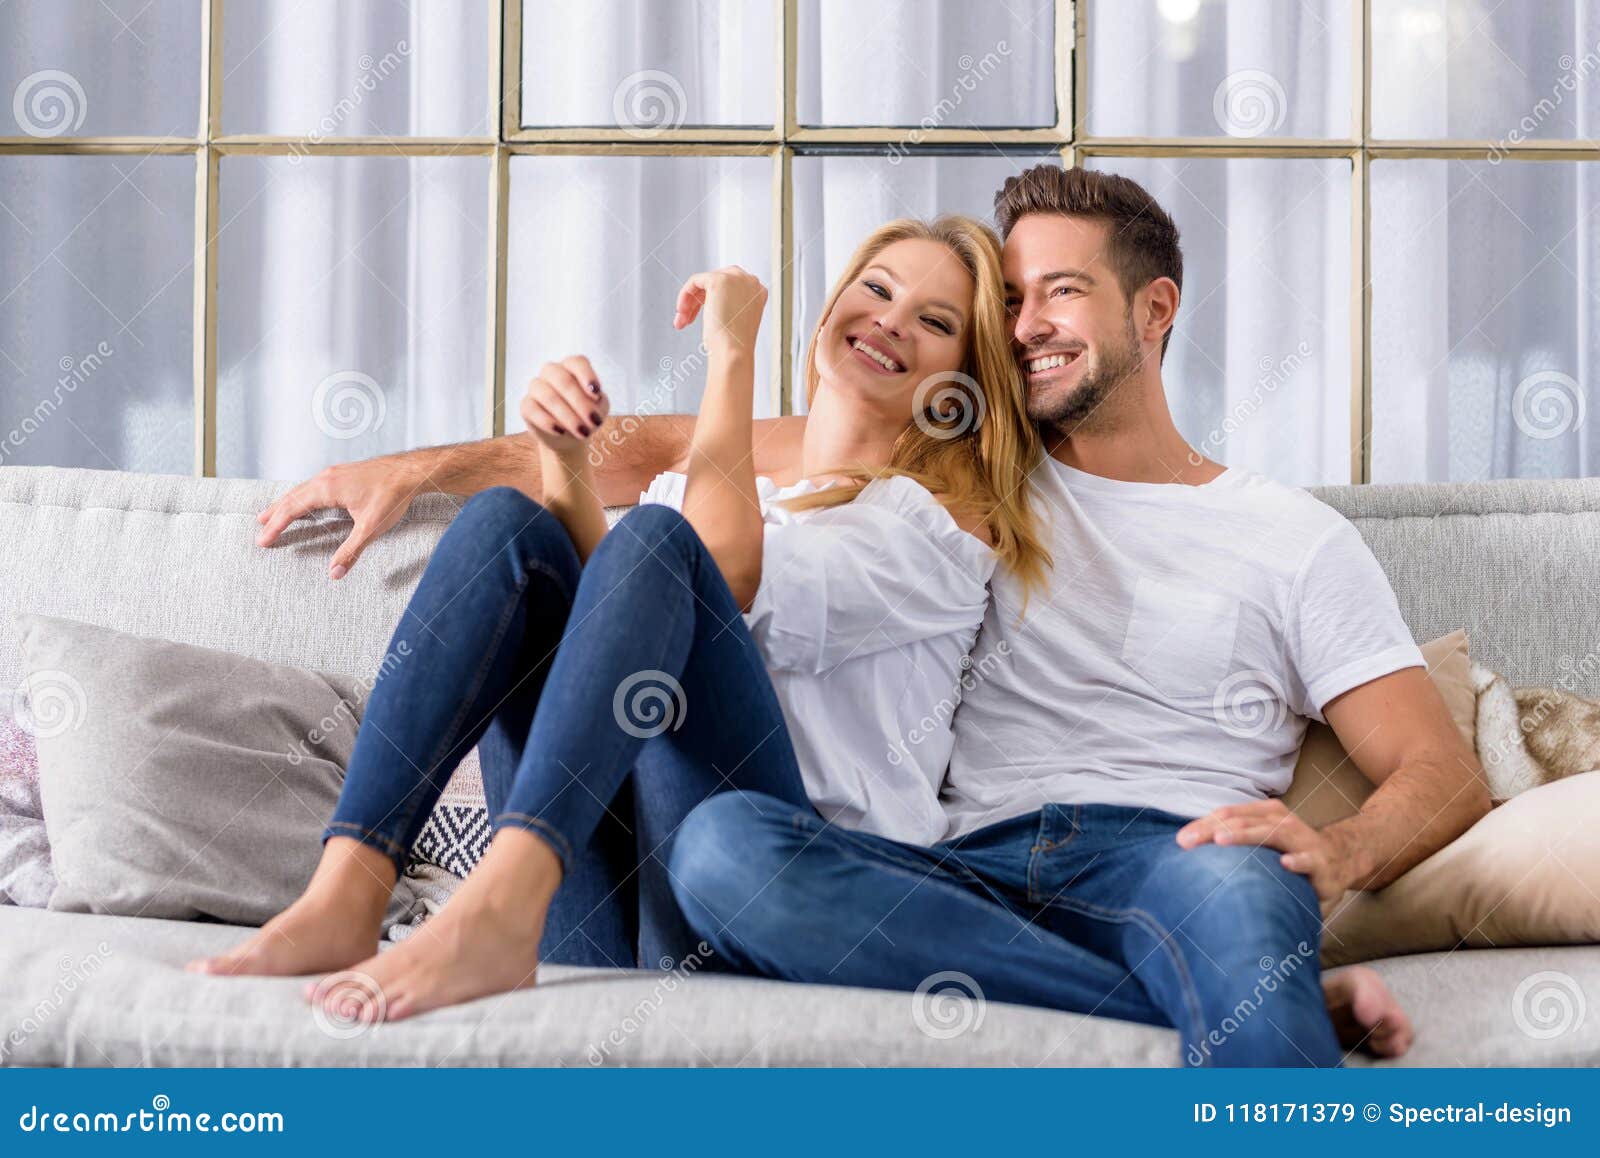 Young Couple Cuddling On The Sofa Stock Image Image Of Passion Couch